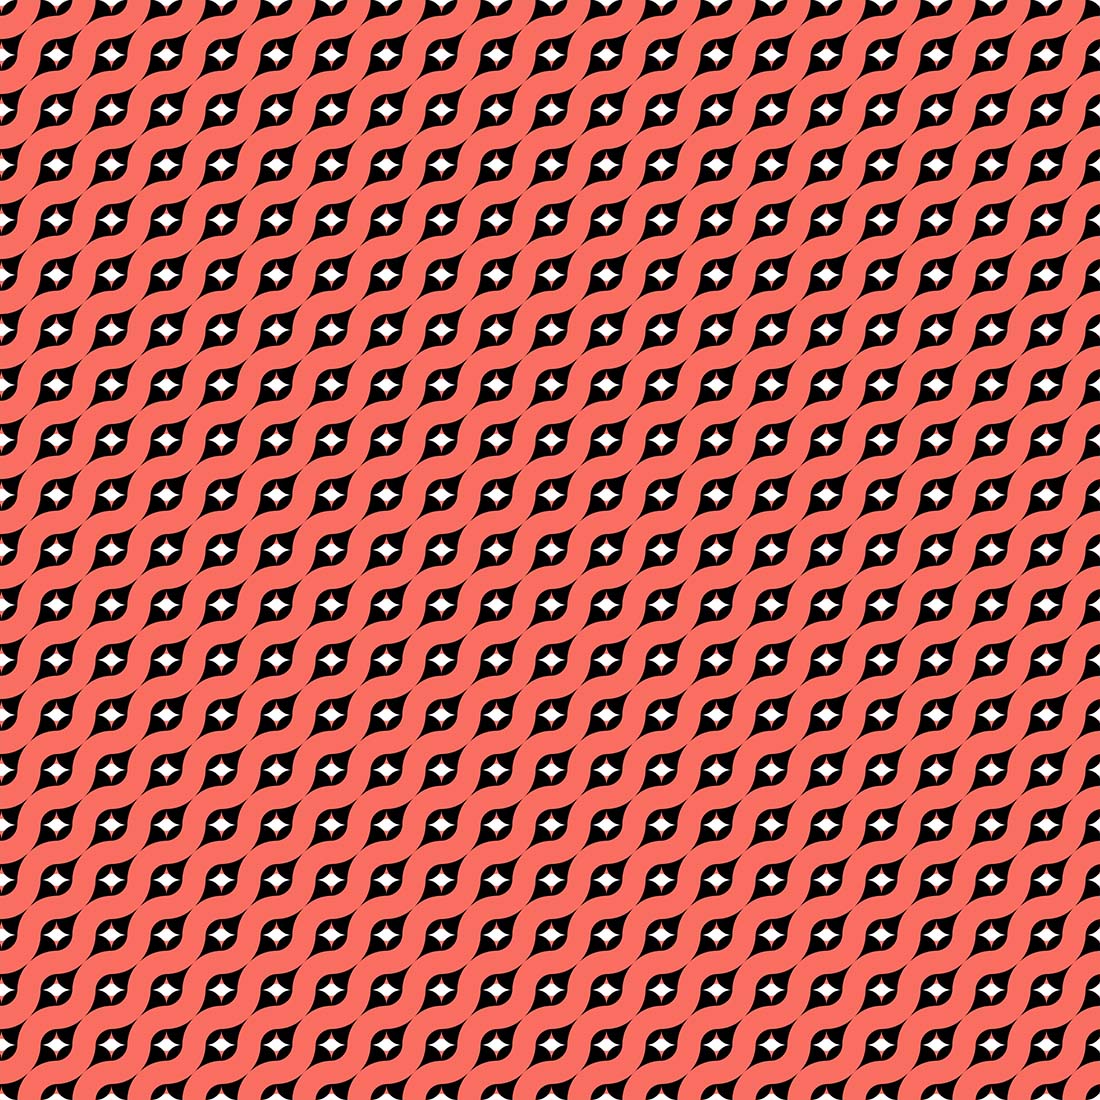 Red background with black and white squares.